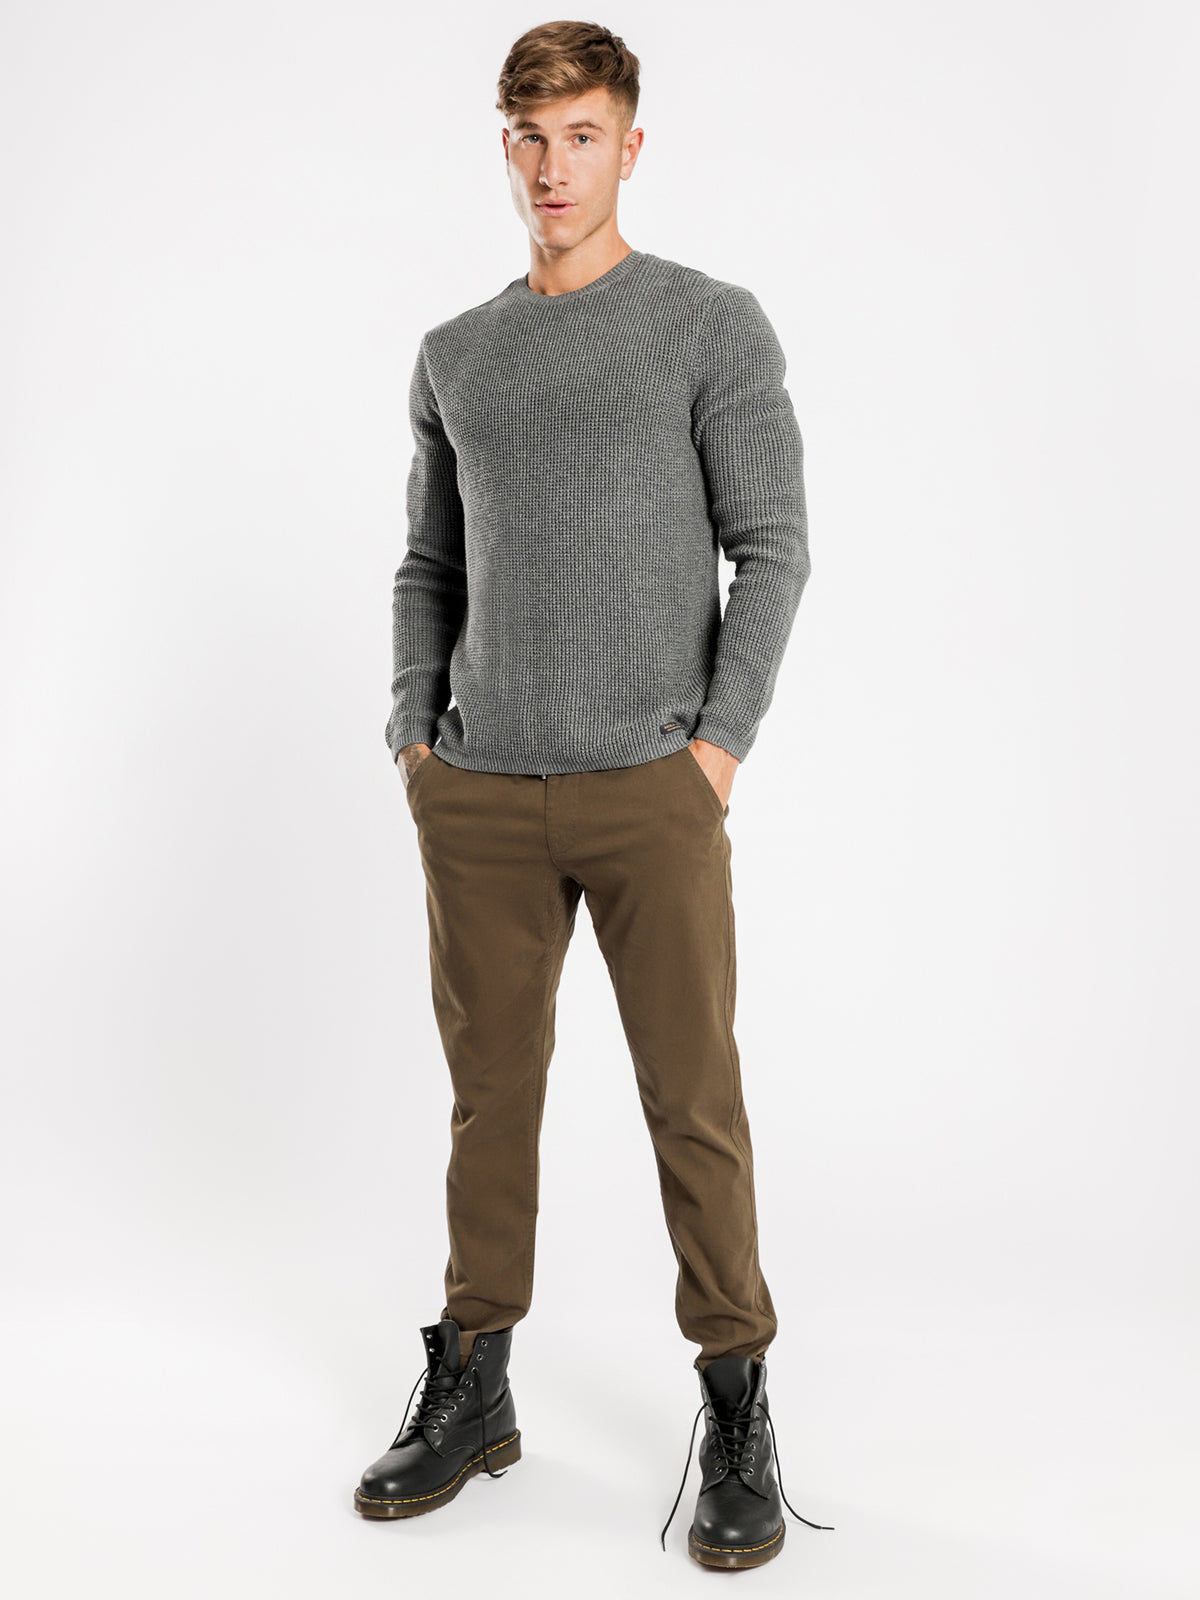 Camden Classic Knit in Charcoal